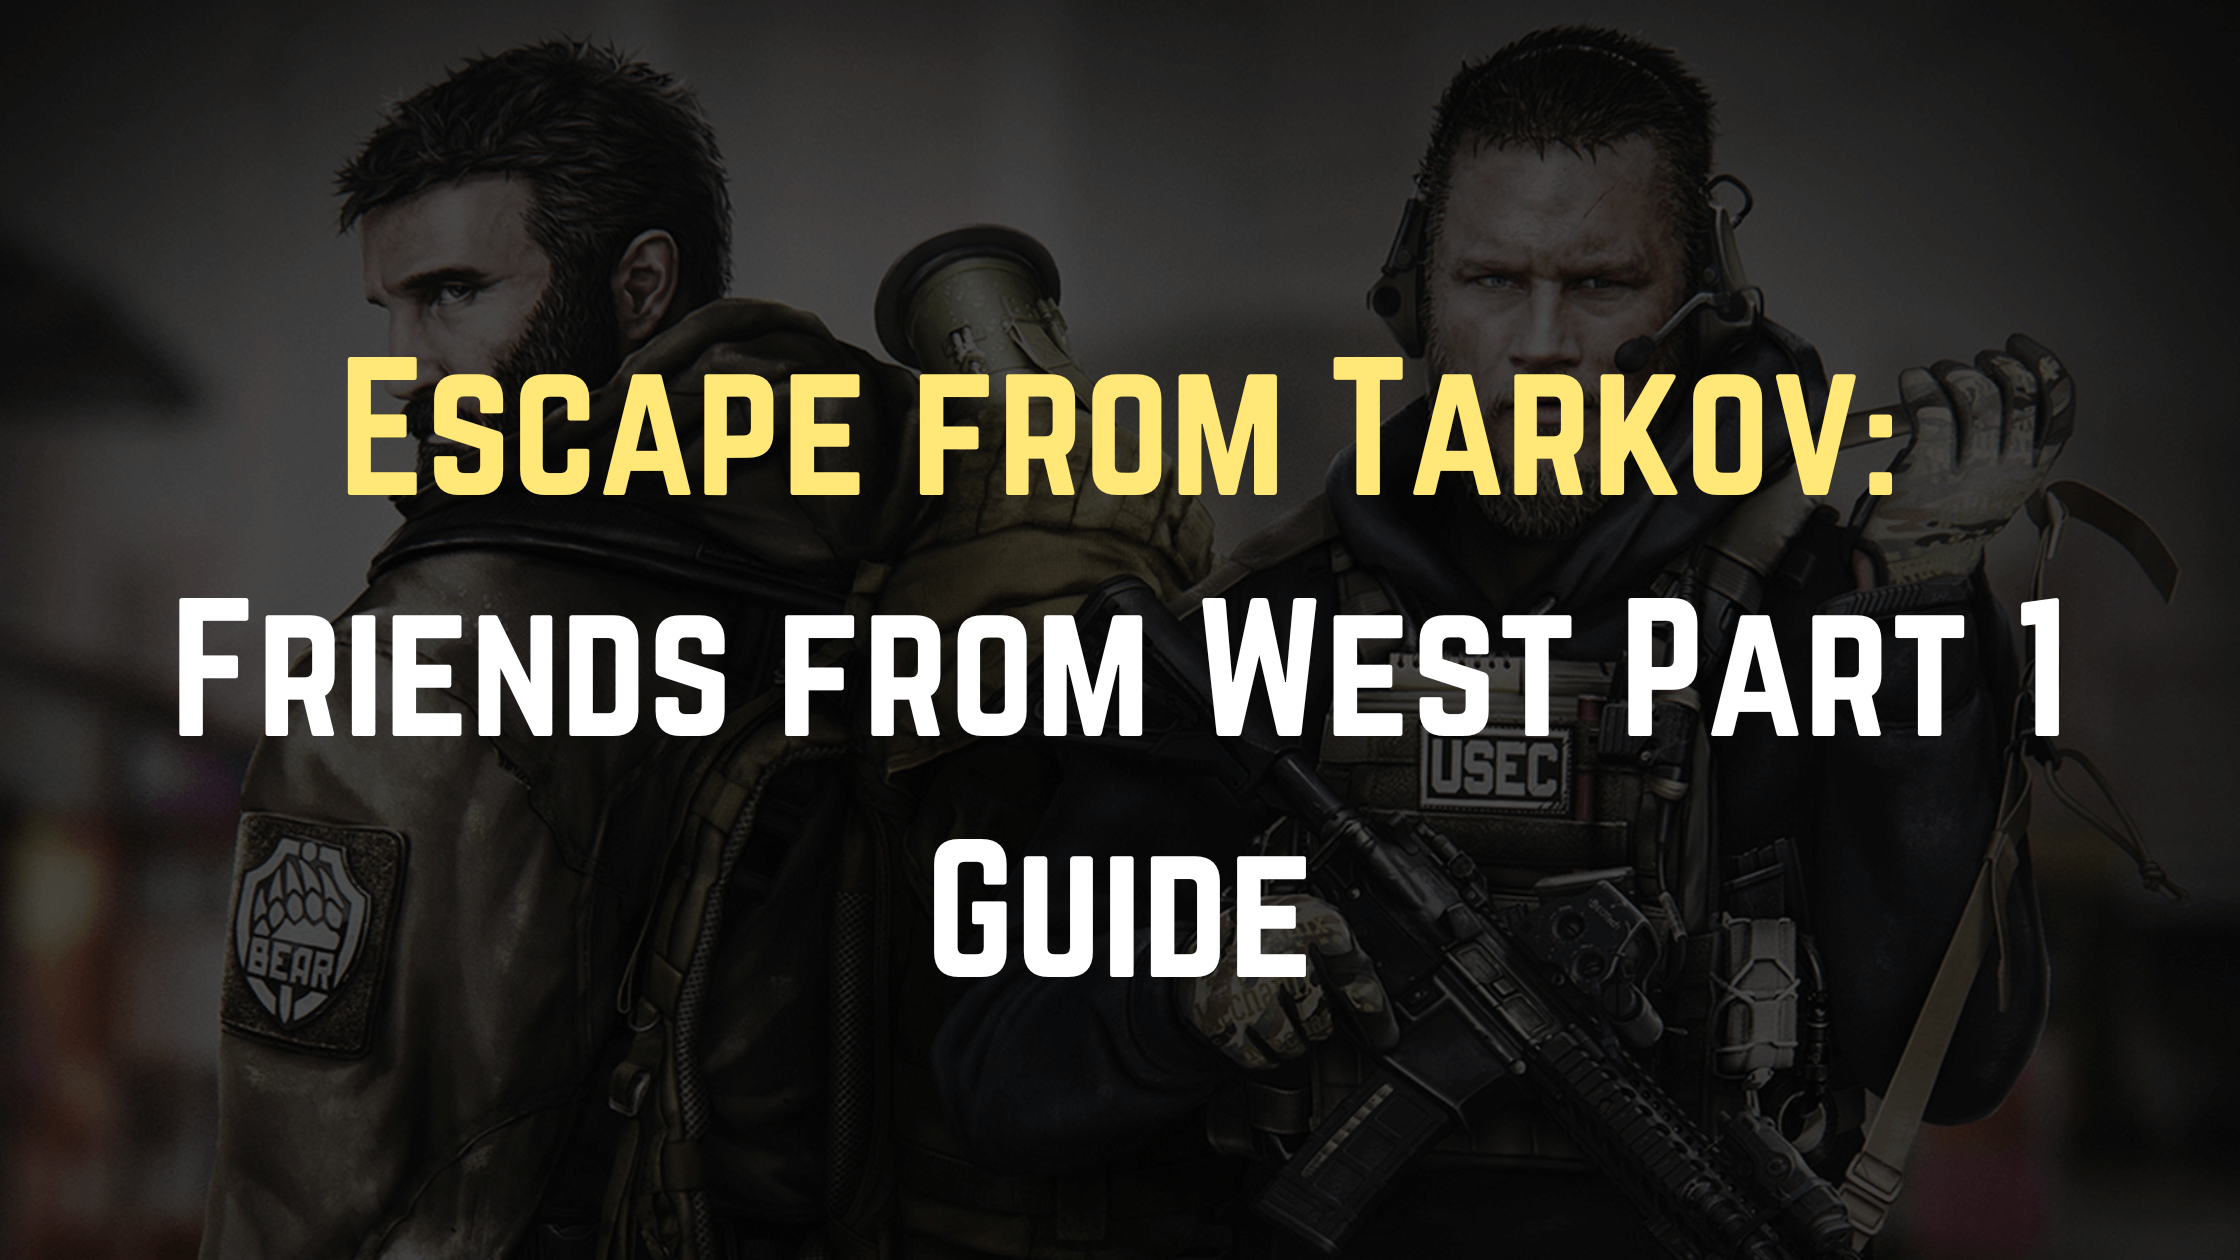 Escape from Tarkov Friends from West Part 1 Guide